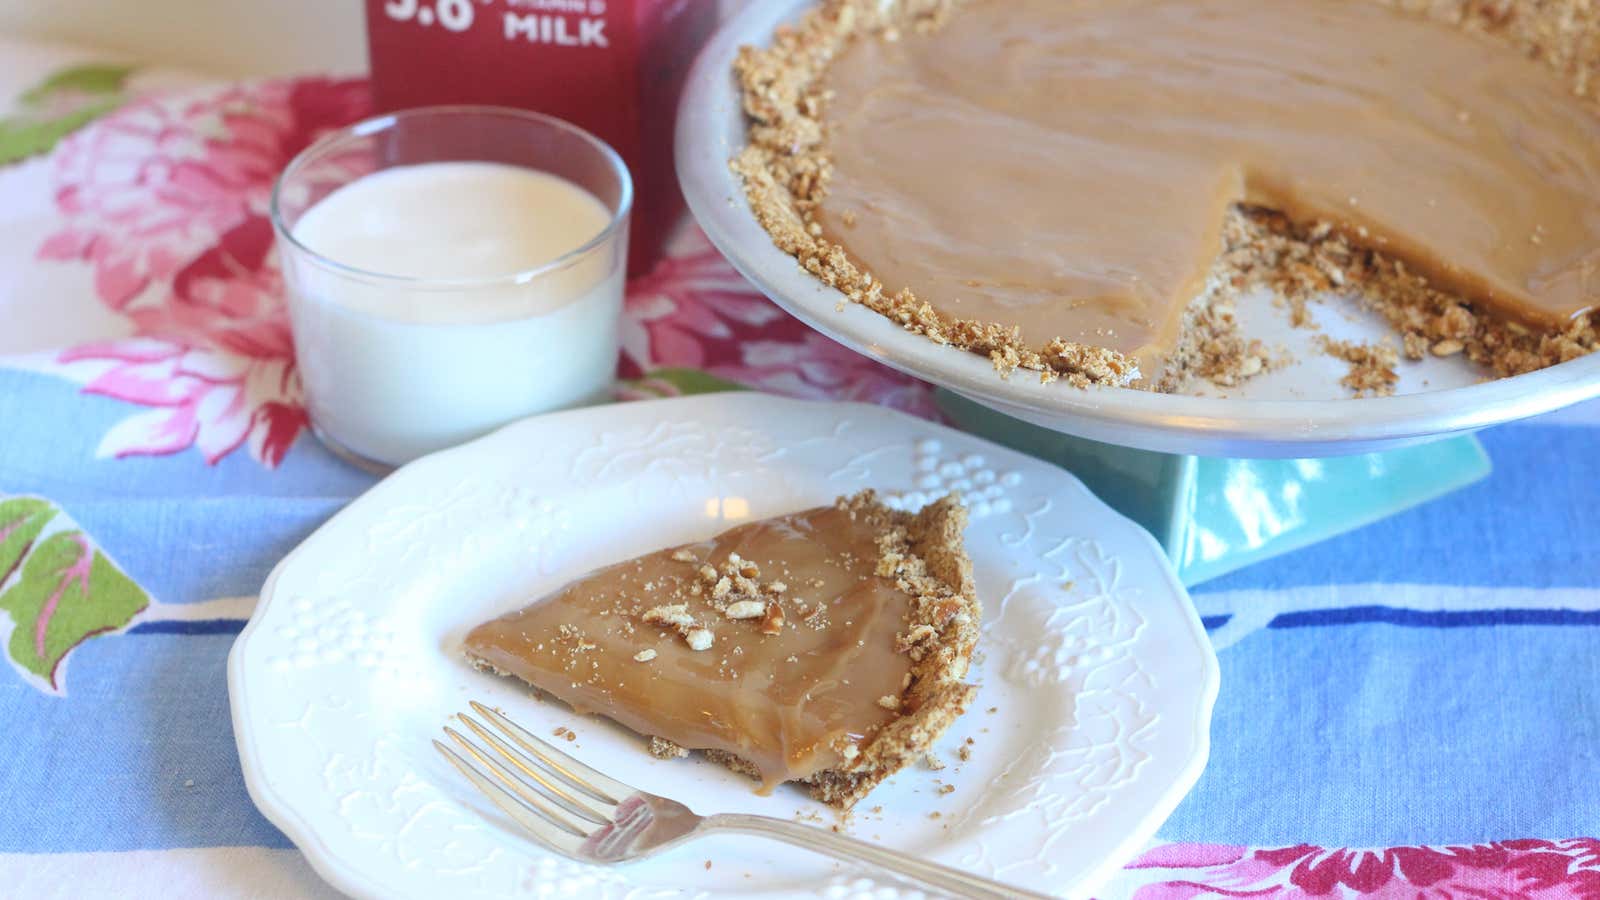 This Eggless, Flourless Pie Was Made for These Times